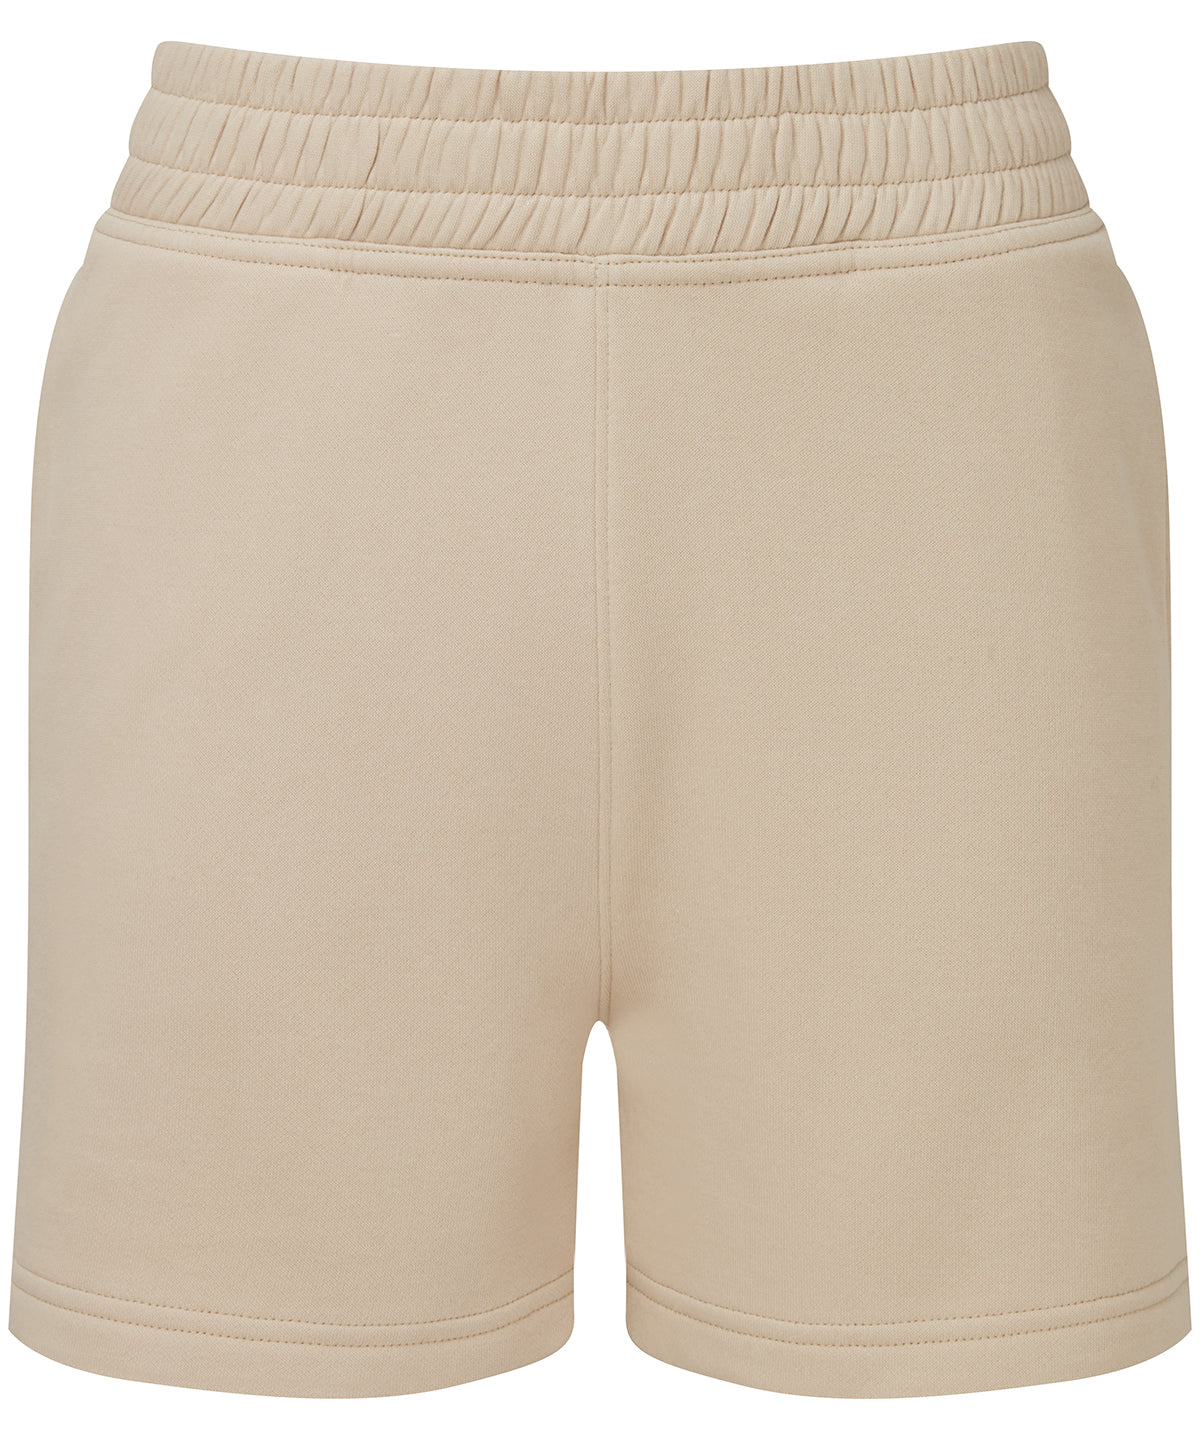 Nude - Women's TriDri® jogger shorts Shorts TriDri® Co-ords, Everyday Essentials, Exclusives, Must Haves, New For 2021, New In Autumn Winter, New In Mid Year, Street Casual, Streetwear, Tracksuits, Trousers & Shorts, Women's Fashion, Working From Home Schoolwear Centres